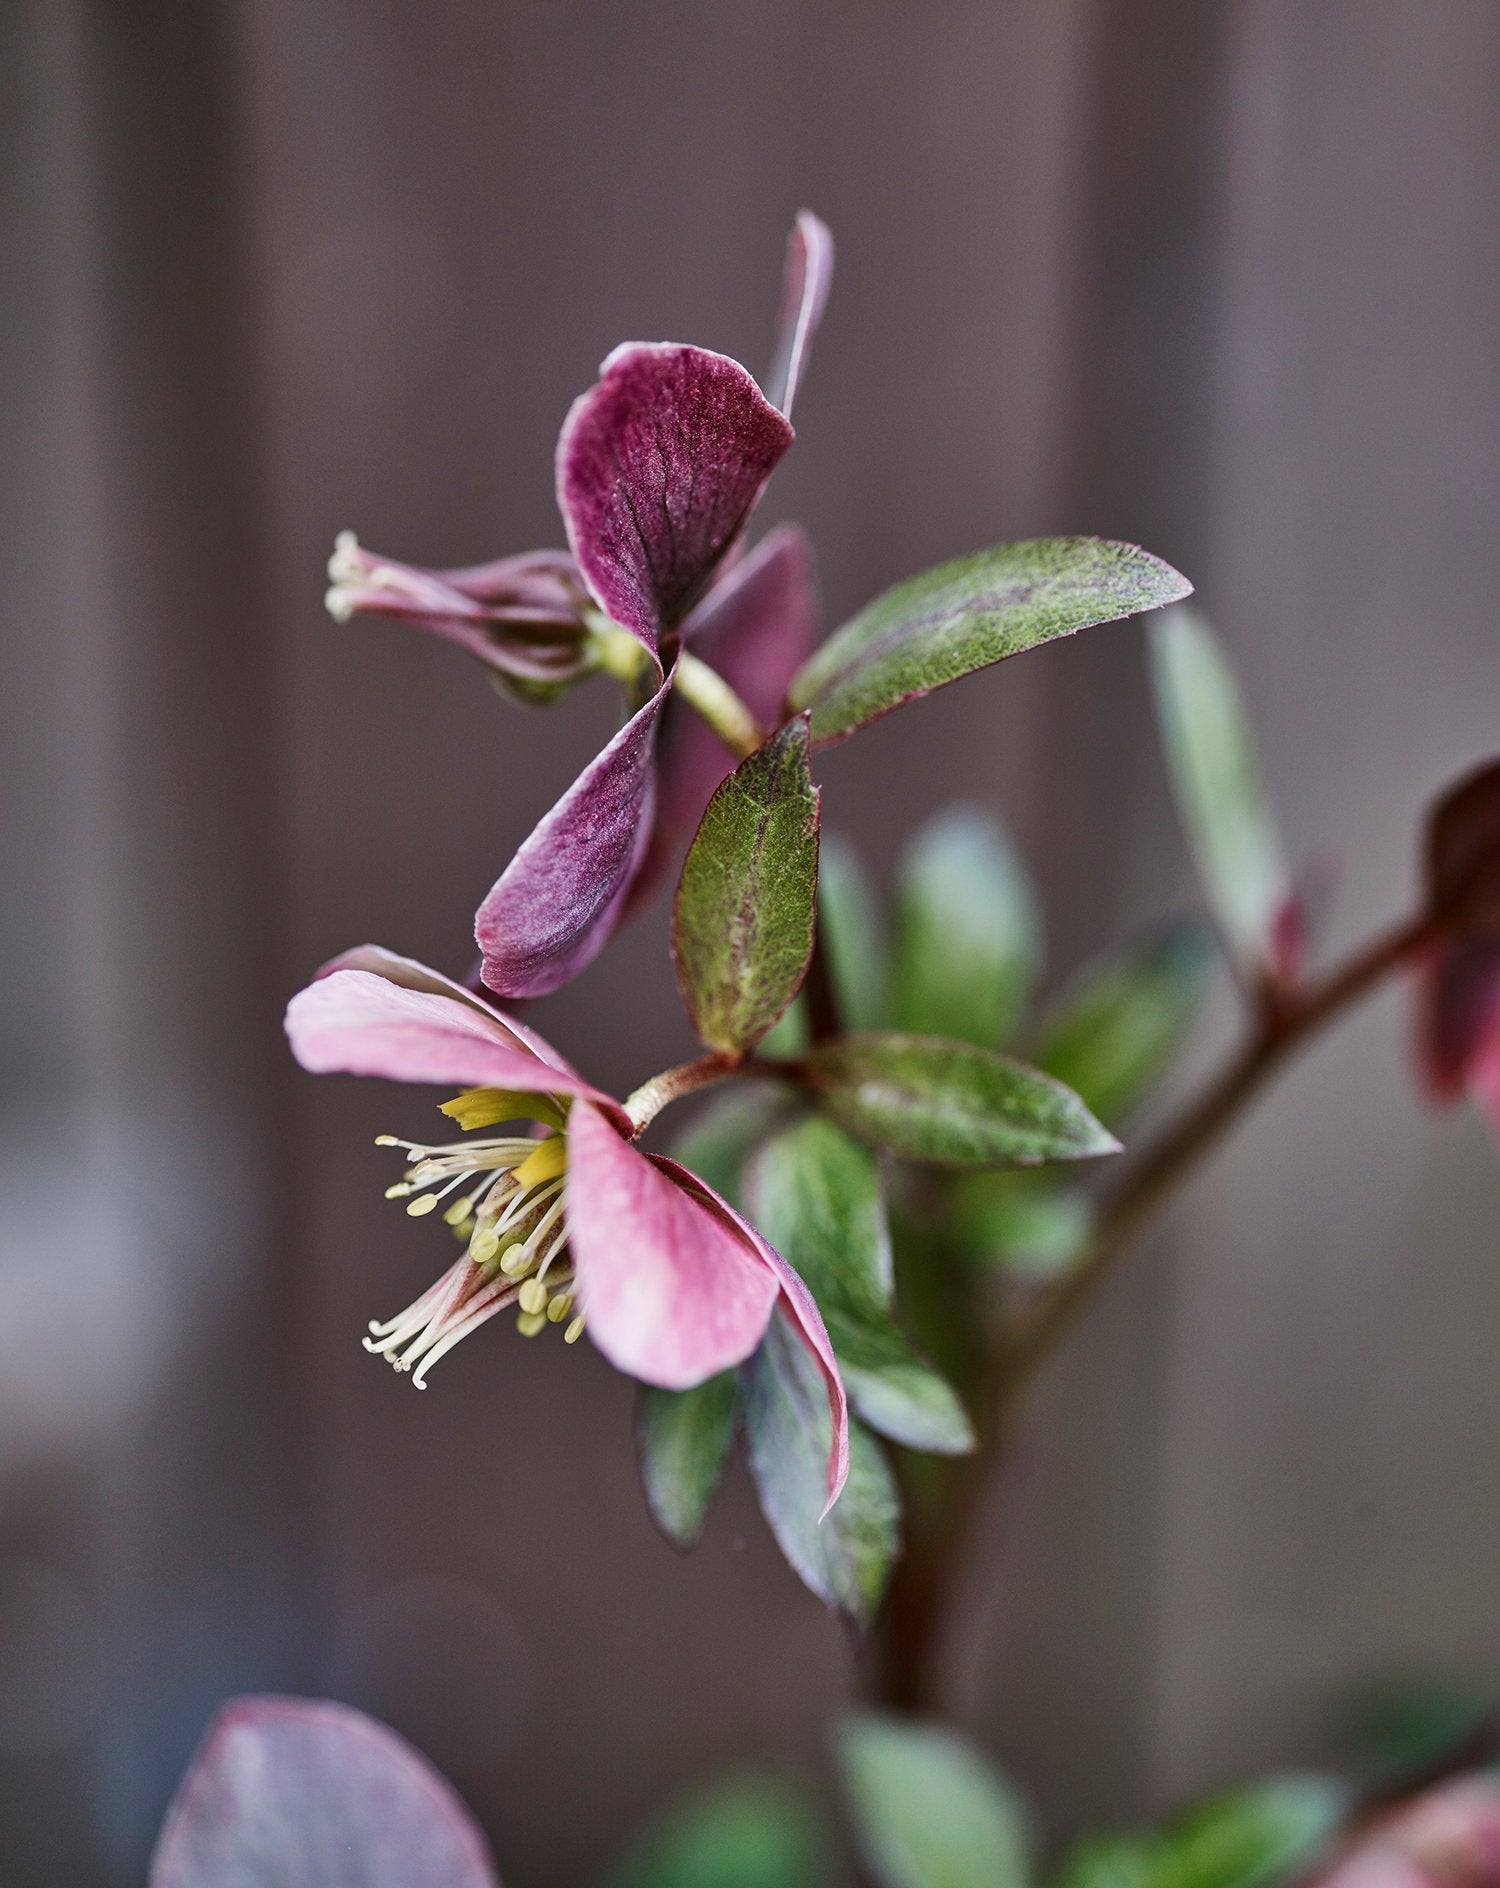 The Hardy Hellebore